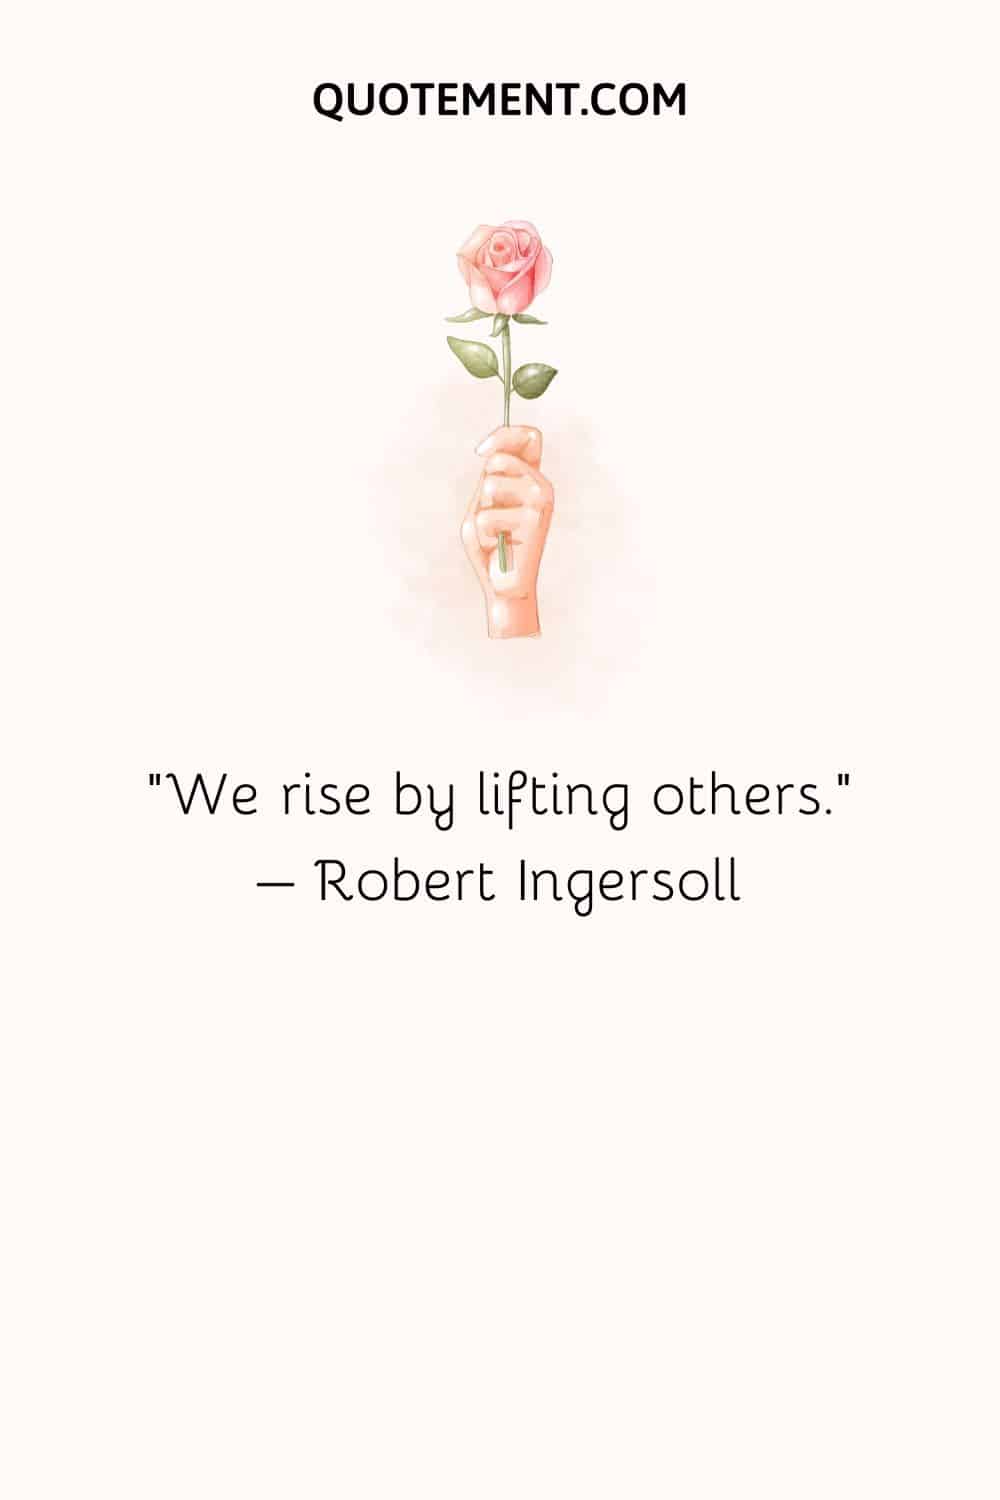 We rise by lifting others - Robert Ingersoll